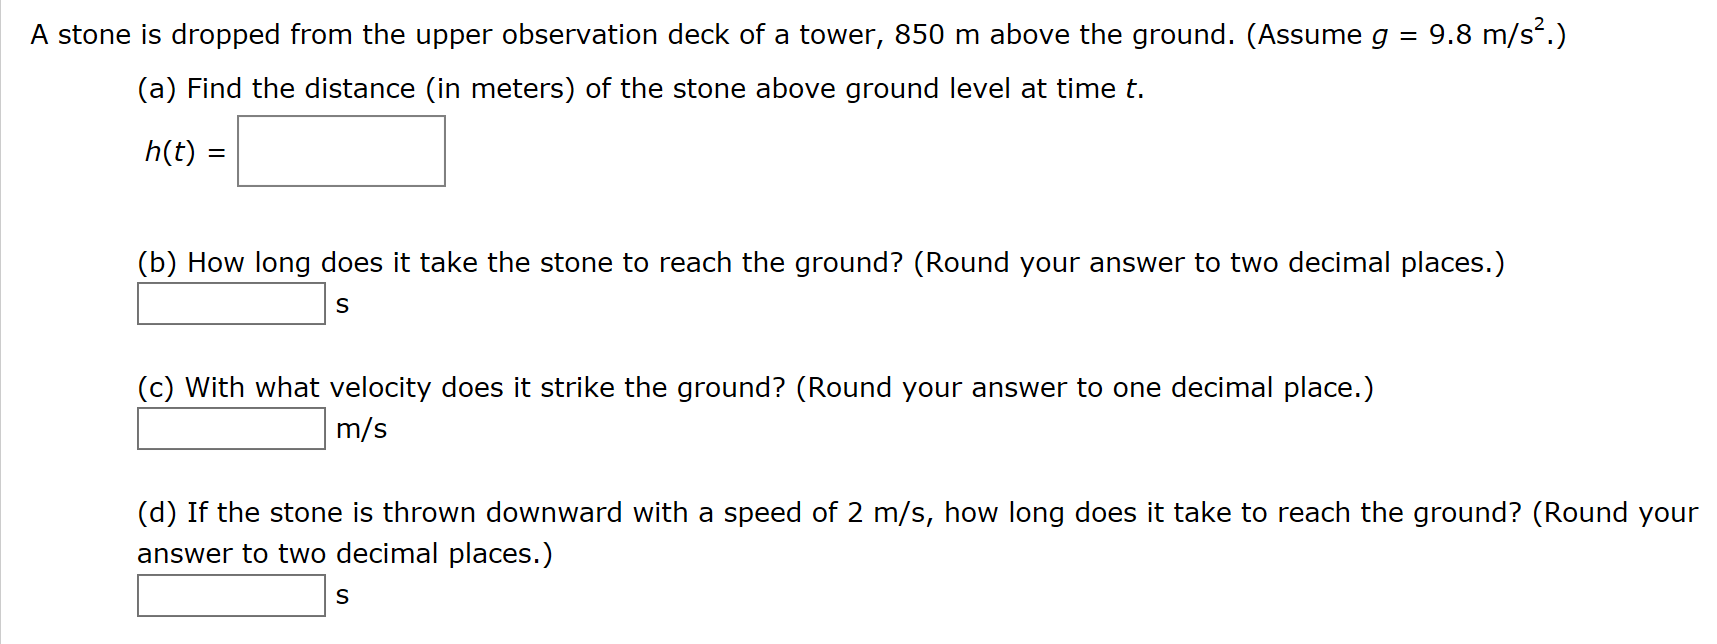 A stone is dropped from the upper observation deck of a tower, 850 m above the ground. (Assume g
9.8 m/s2.)
(a) Find the distance (in meters) of the stone above ground level at time t
h(t)
(b) How long does it take the stone to reach the ground? (Round your answer to two decimal places.)
S
(c) With what velocity does it strike the ground? (Round your answer to one decimal place.)
m/s
(d) If the stone is thrown downward with a speed of 2 m/s, how long does it take to reach the ground? (Round your
answer to two decimal places.)
S
